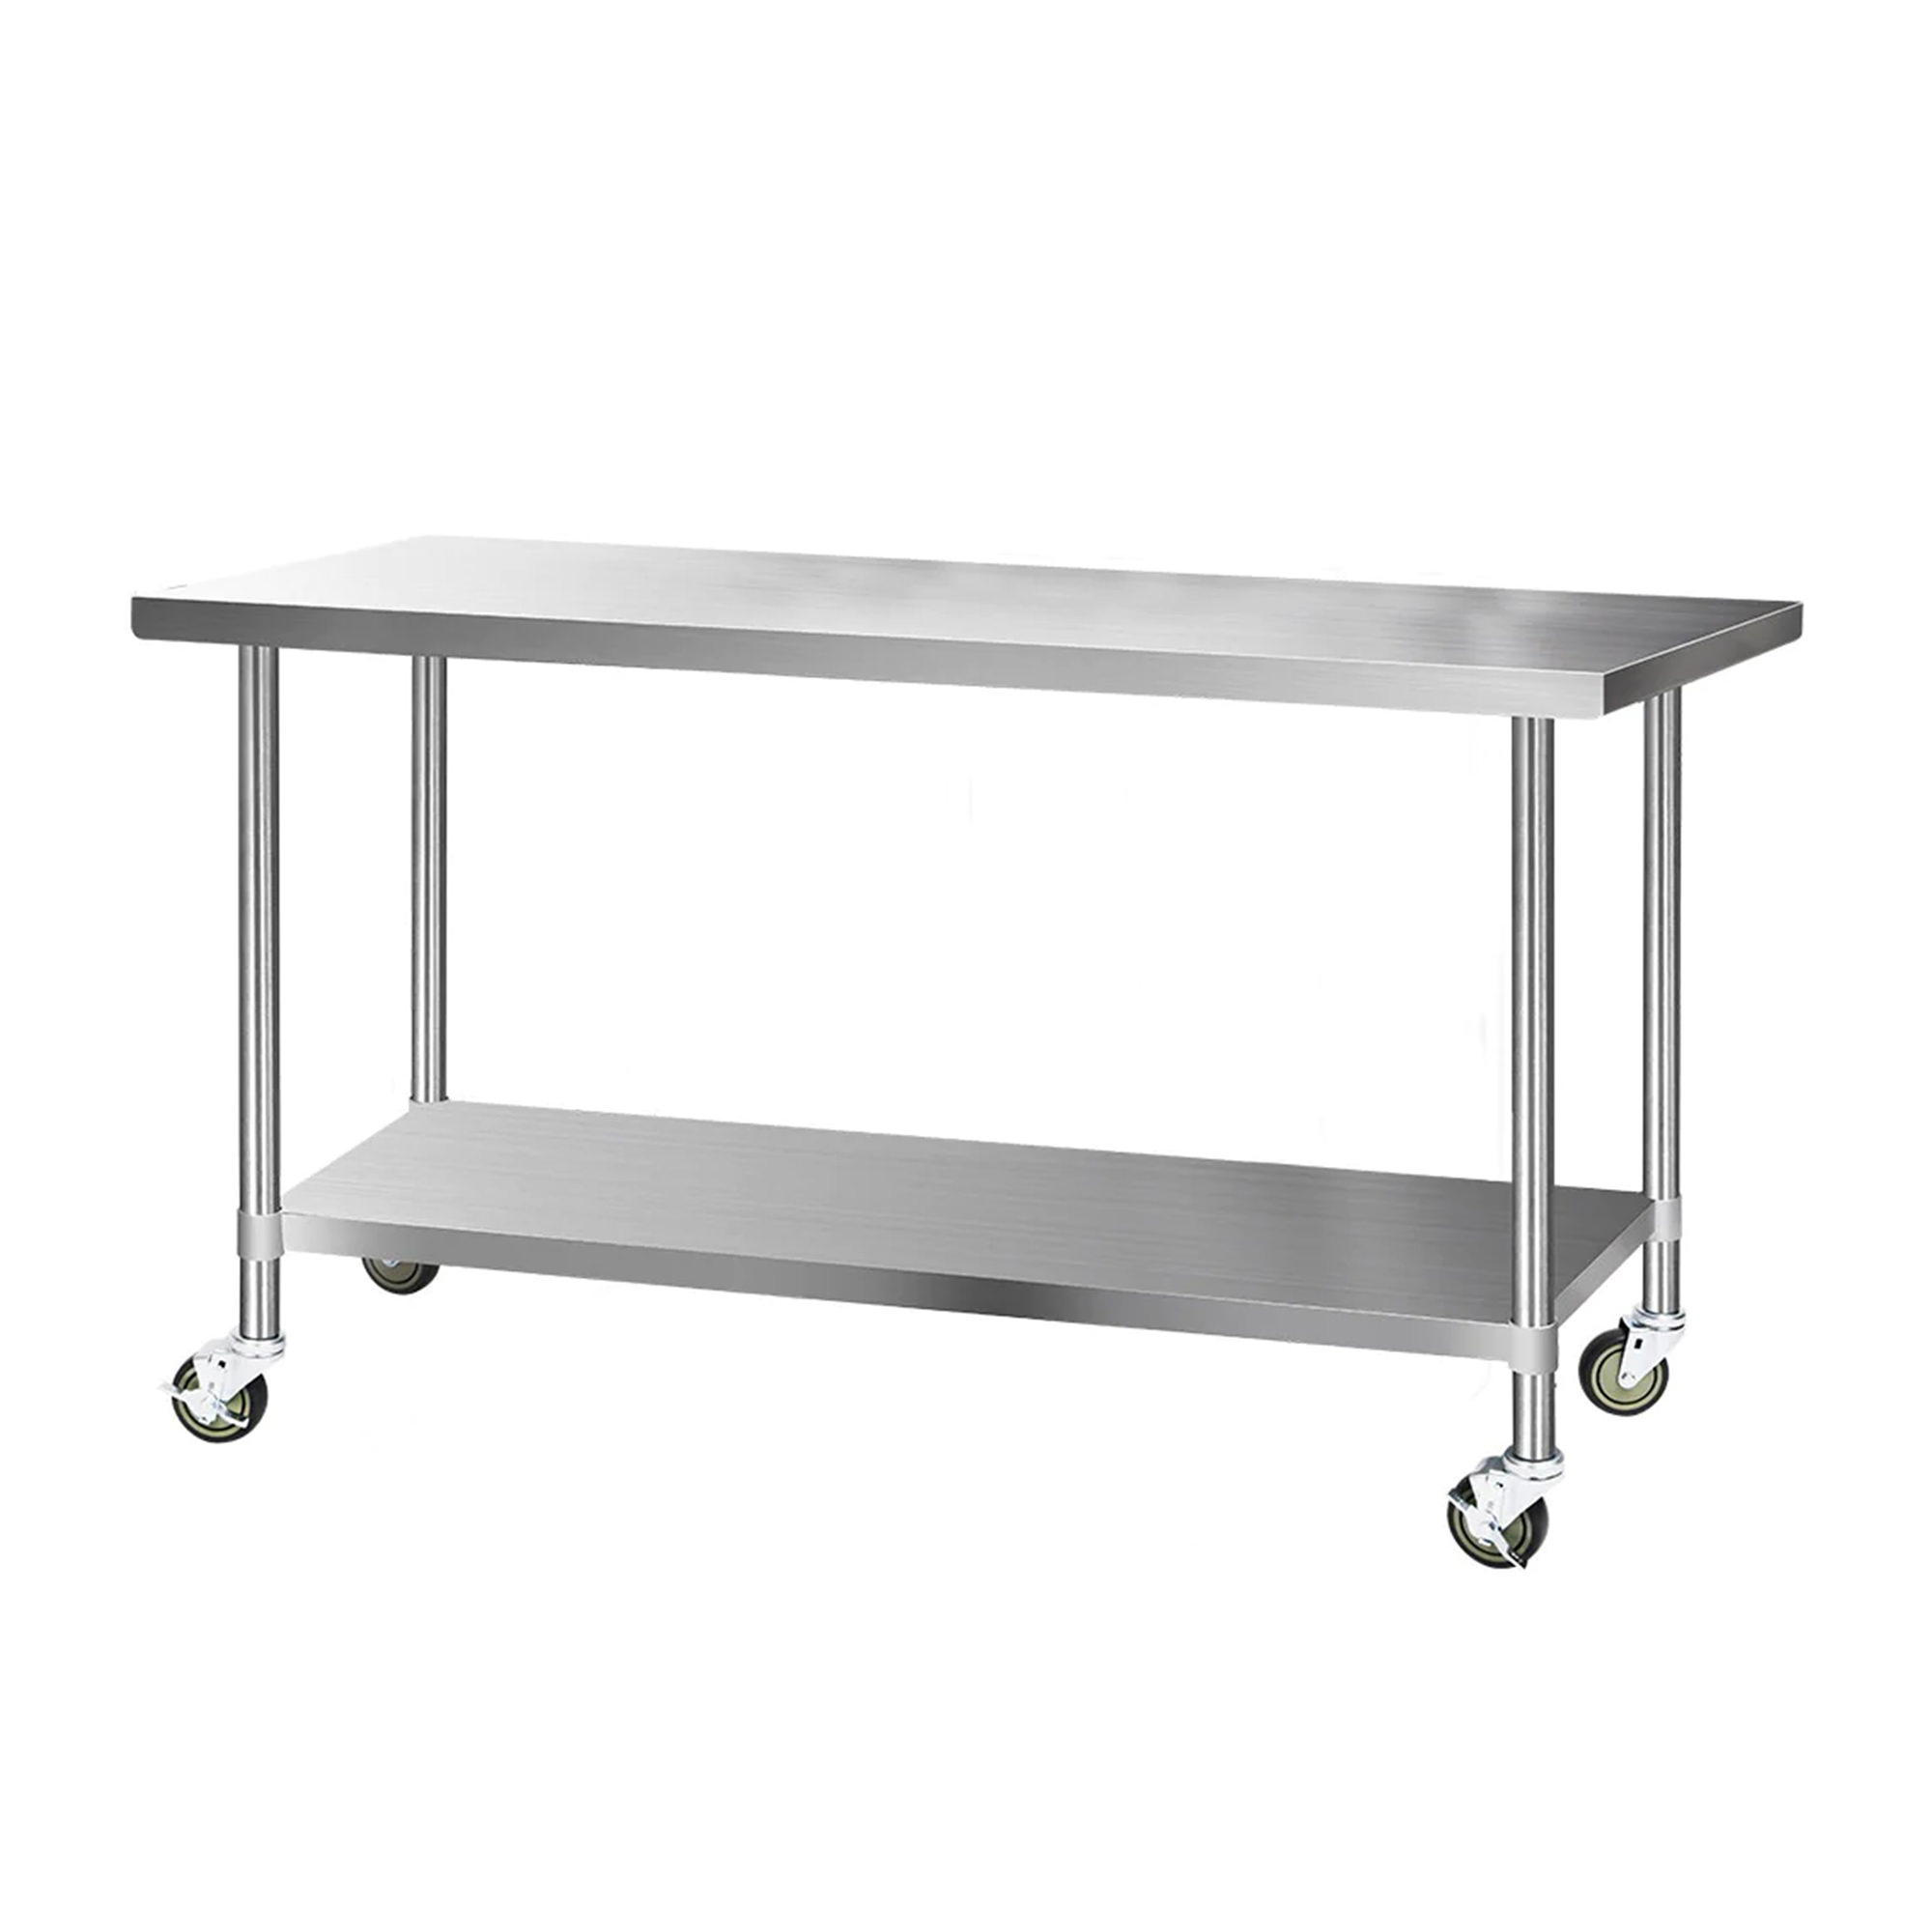 Cefito 430 Stainless Steel Kitchen Bench with Wheels 182.9x76cm Image 1